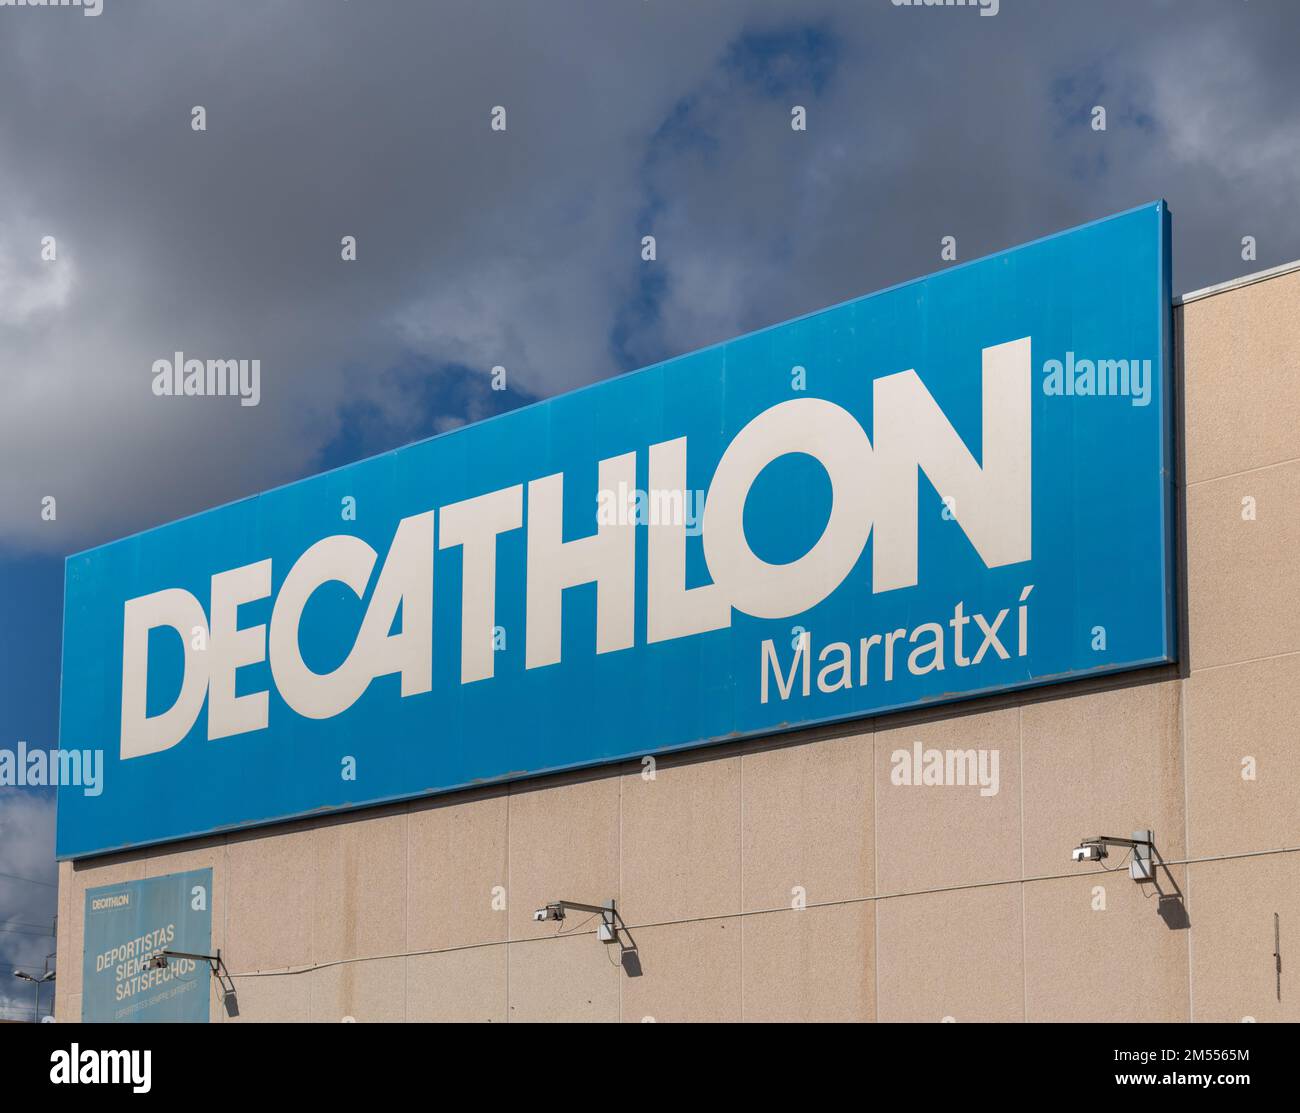 Sao Paulo, Brazil - december 29 2019 - Decathlon sign on building in  Paulista avenue. Decathlon is a french company and one of the world's  largest sporting goods retailers Photos